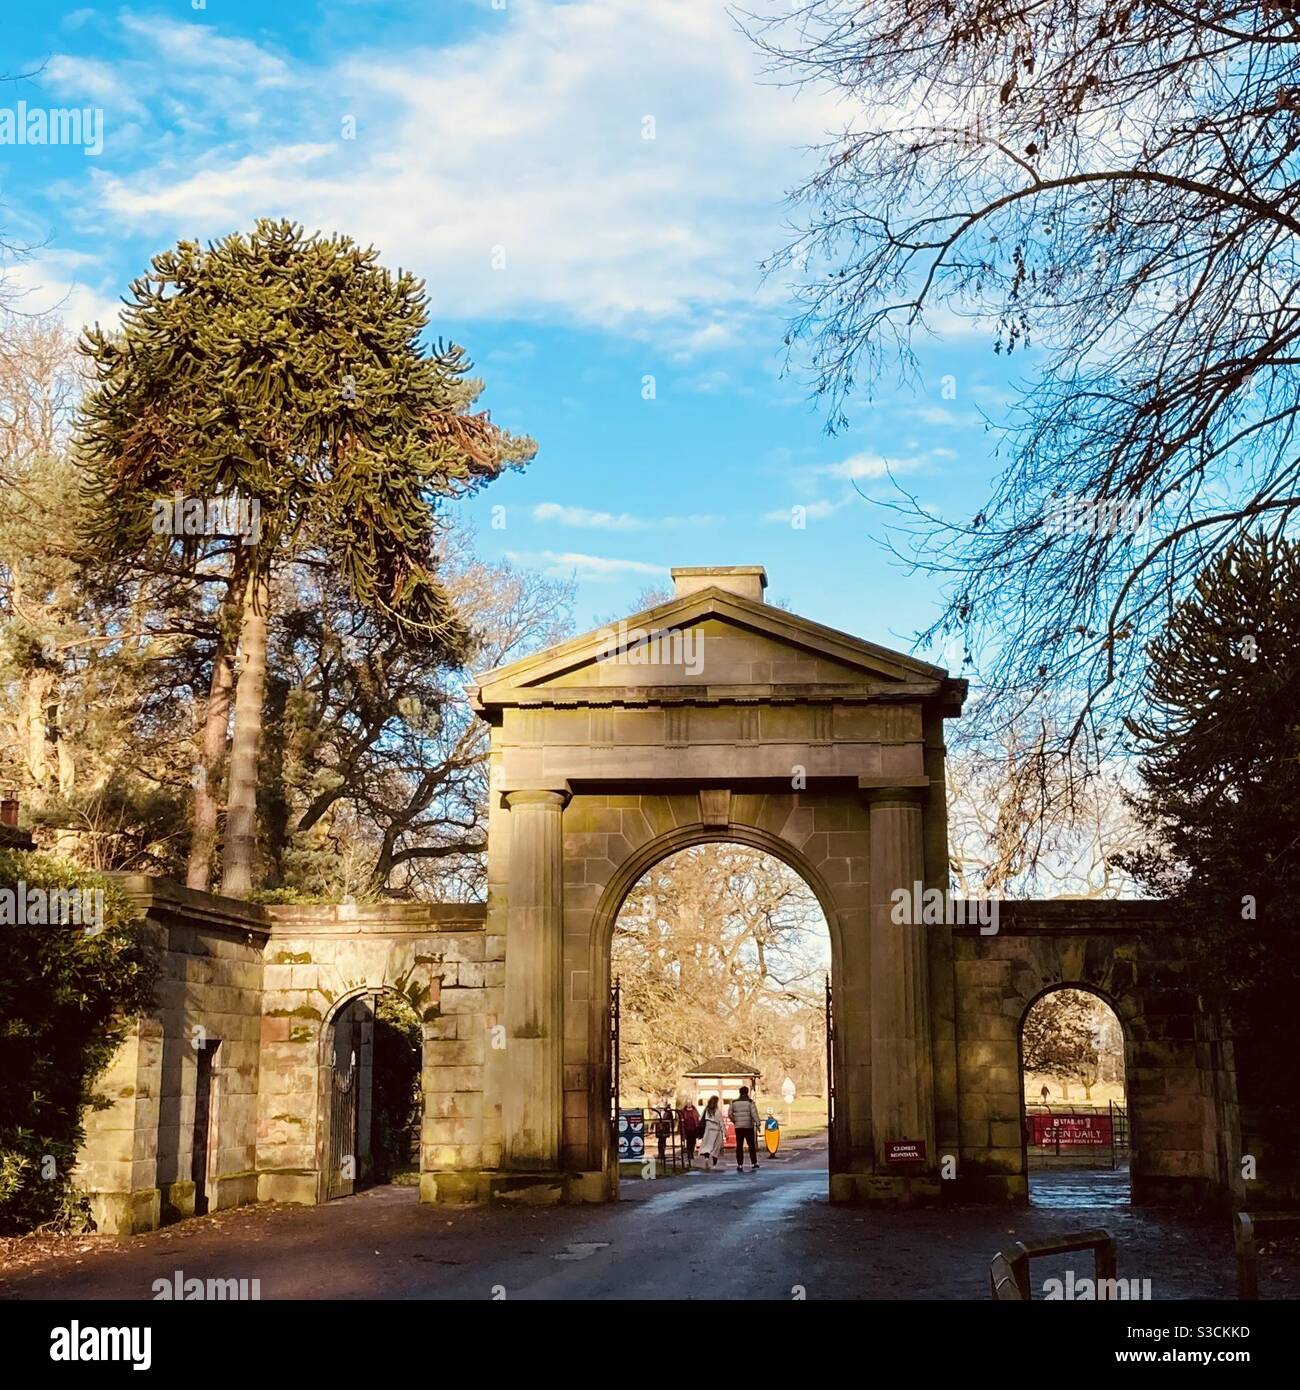 walkers at arch stone gate entrance to Tatton Park Knutsford Cheshire Stock Photo